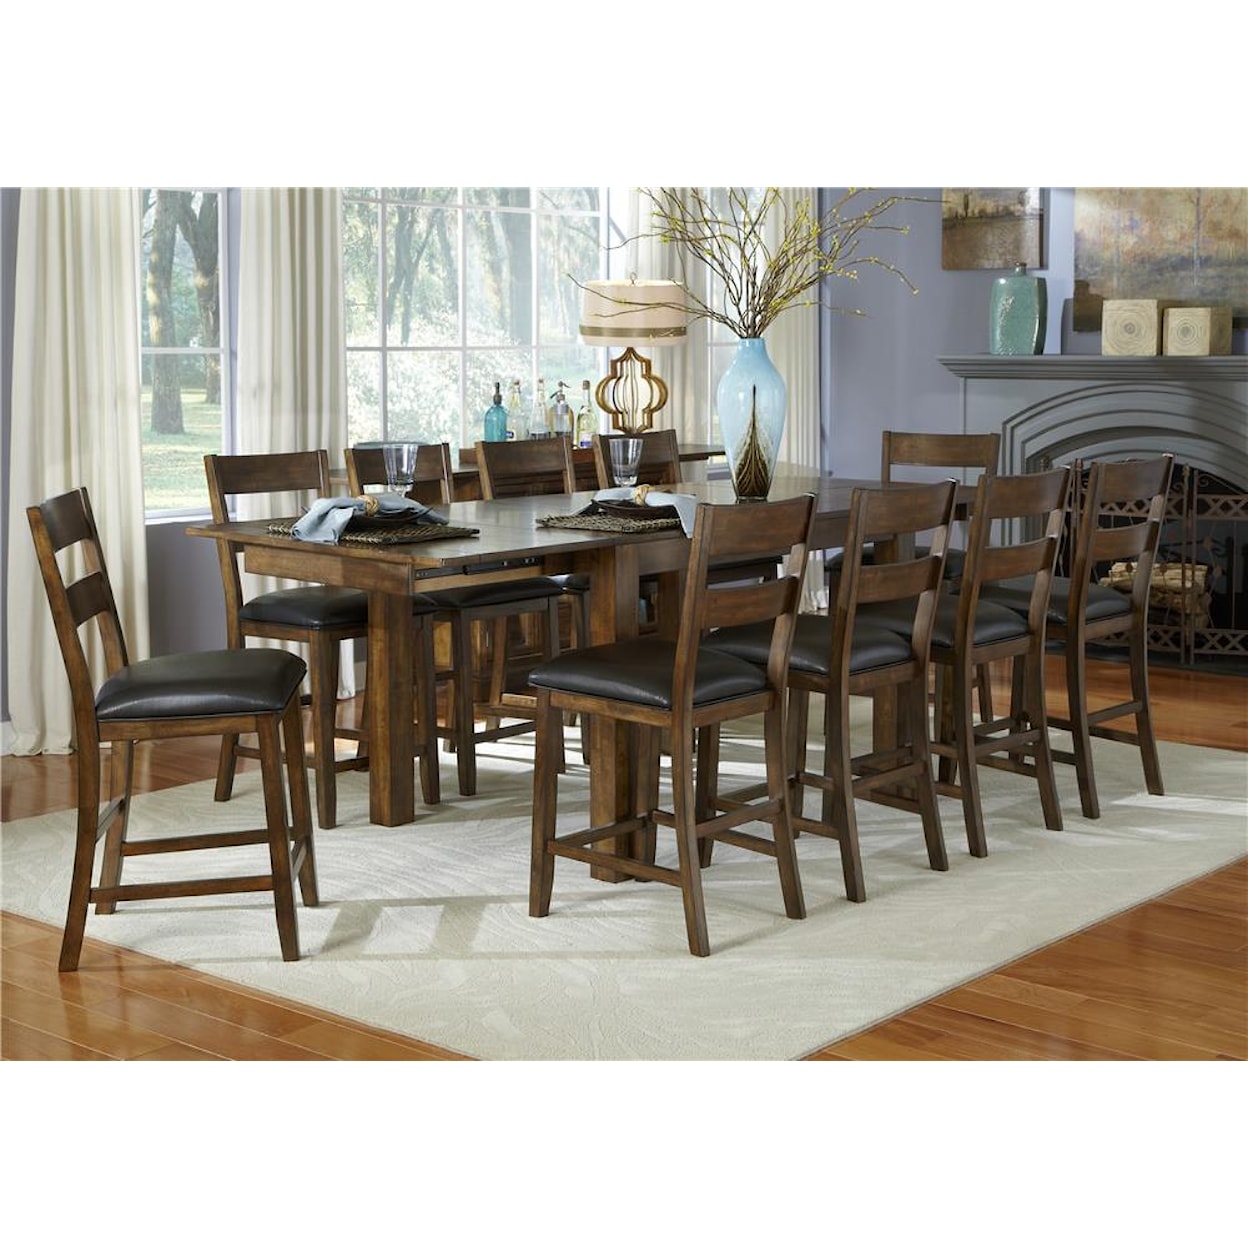 AAmerica Mariposa 5 Piece Counter Height Dining Room